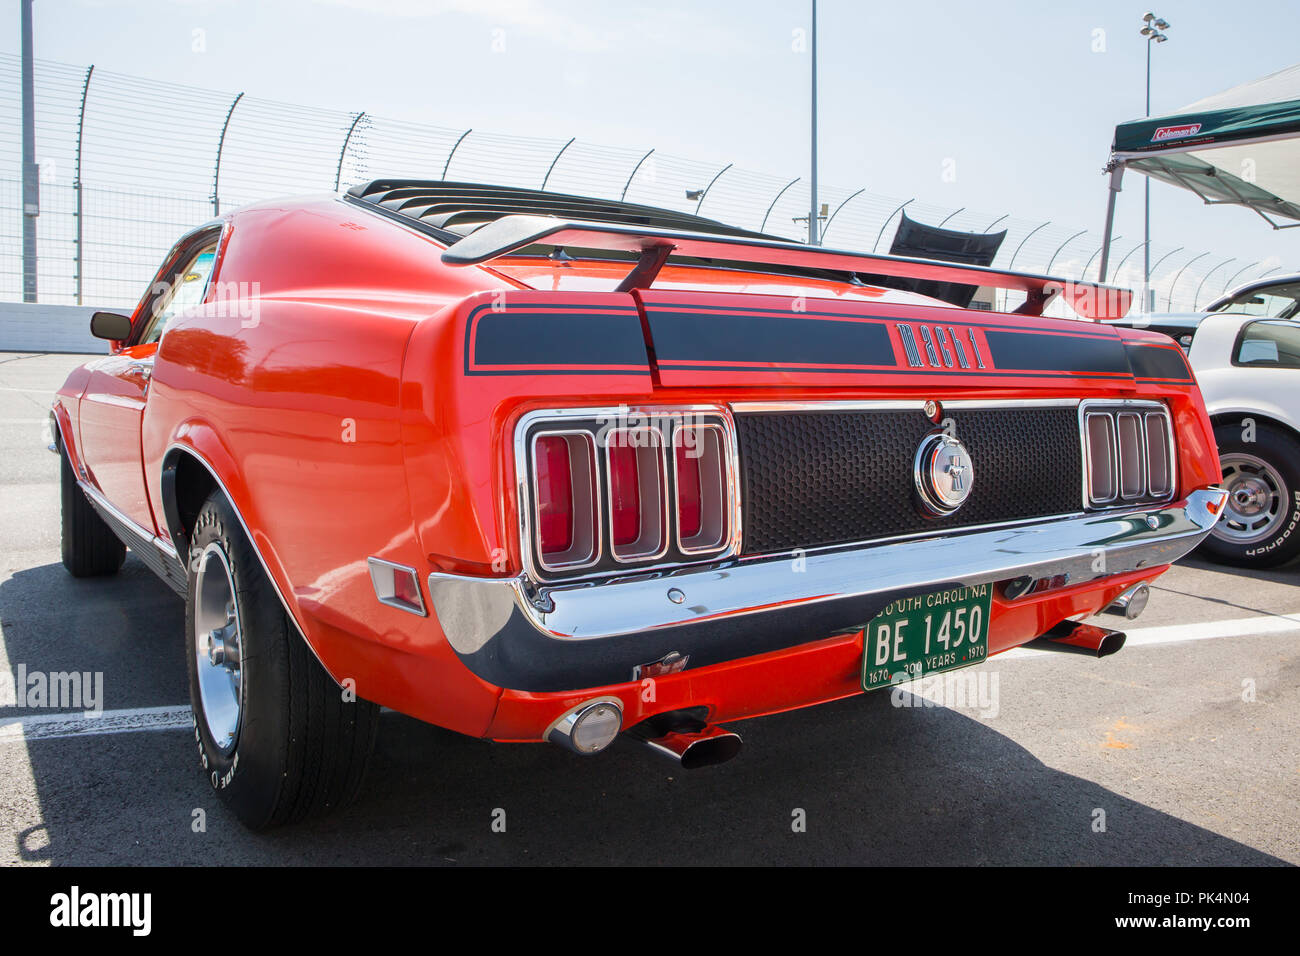 CONCORD, NC (USA) - September 7, 2018:  A 1970 Ford Mustang Mach 1 on display at the Pennzoil AutoFair Classic Car Show at Charlotte Motor Speedway. Stock Photo